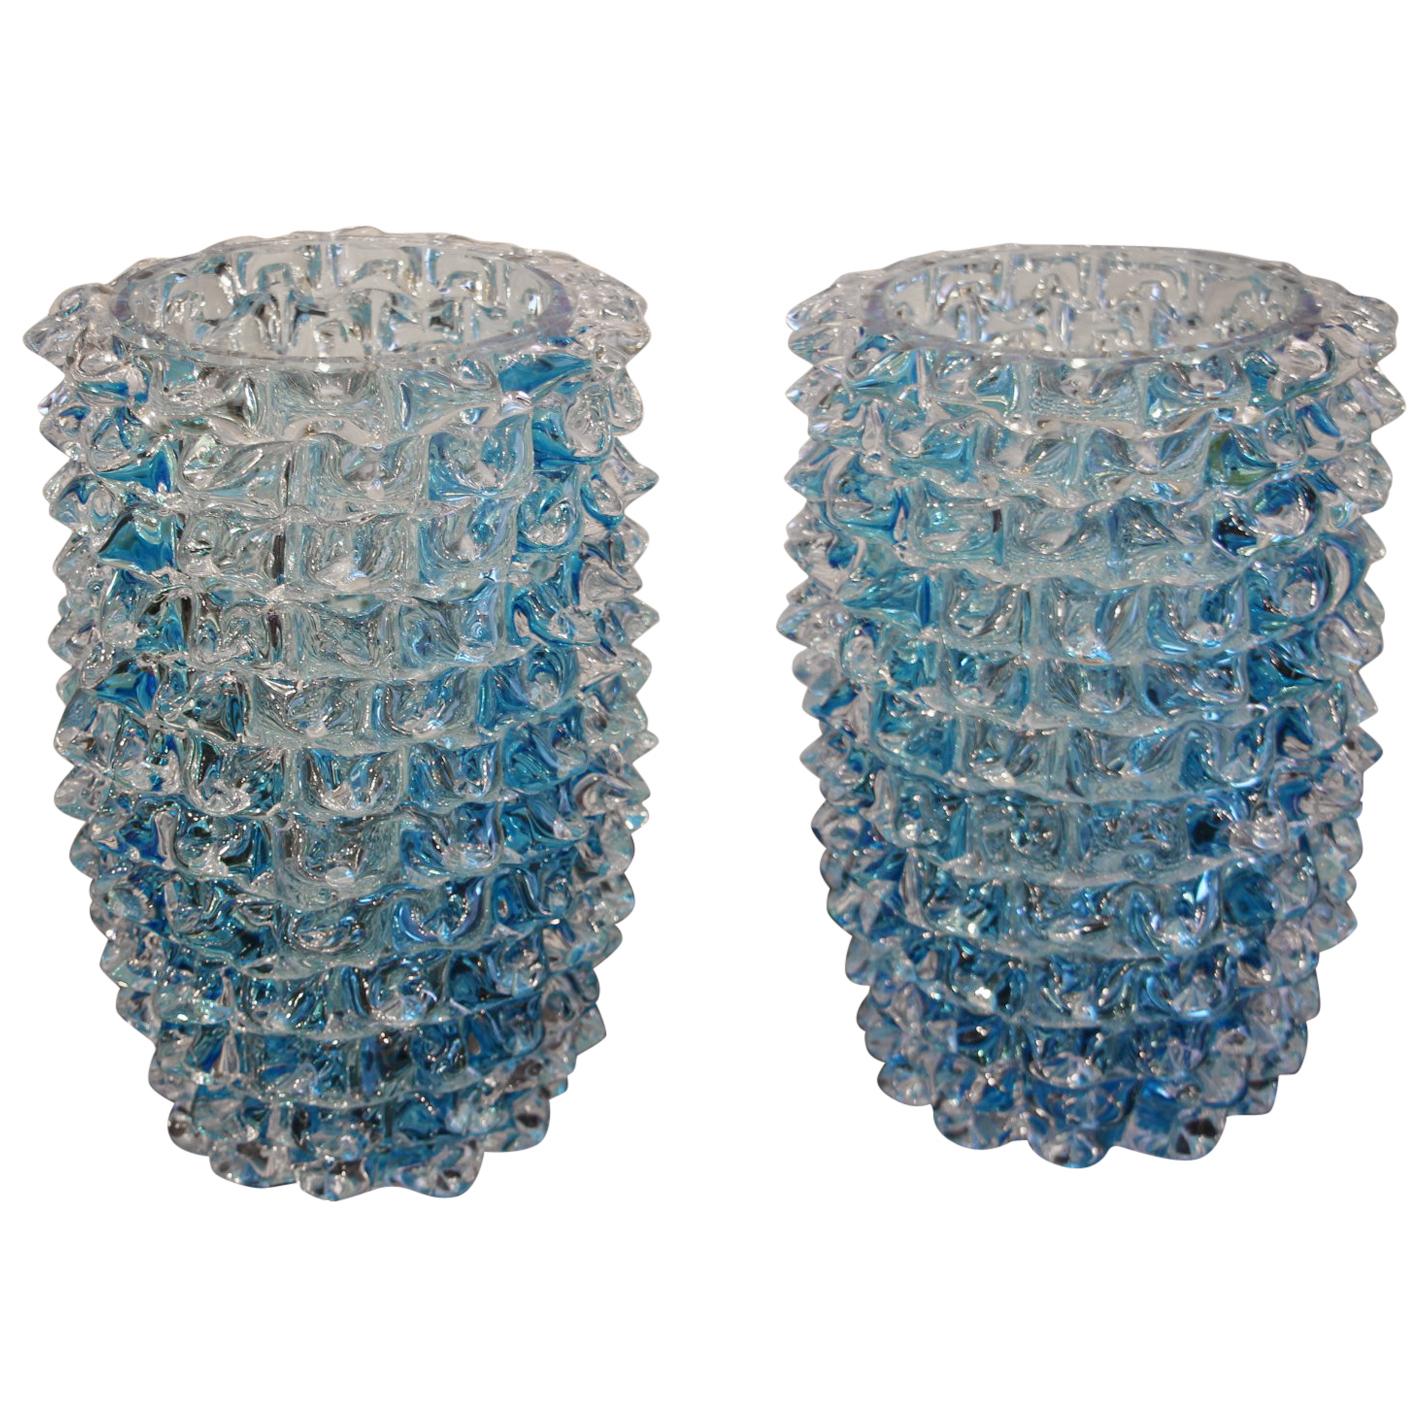 Pair of Turquoise Blue Vase in Murano Glass with Spikes Decor, Barovier Style